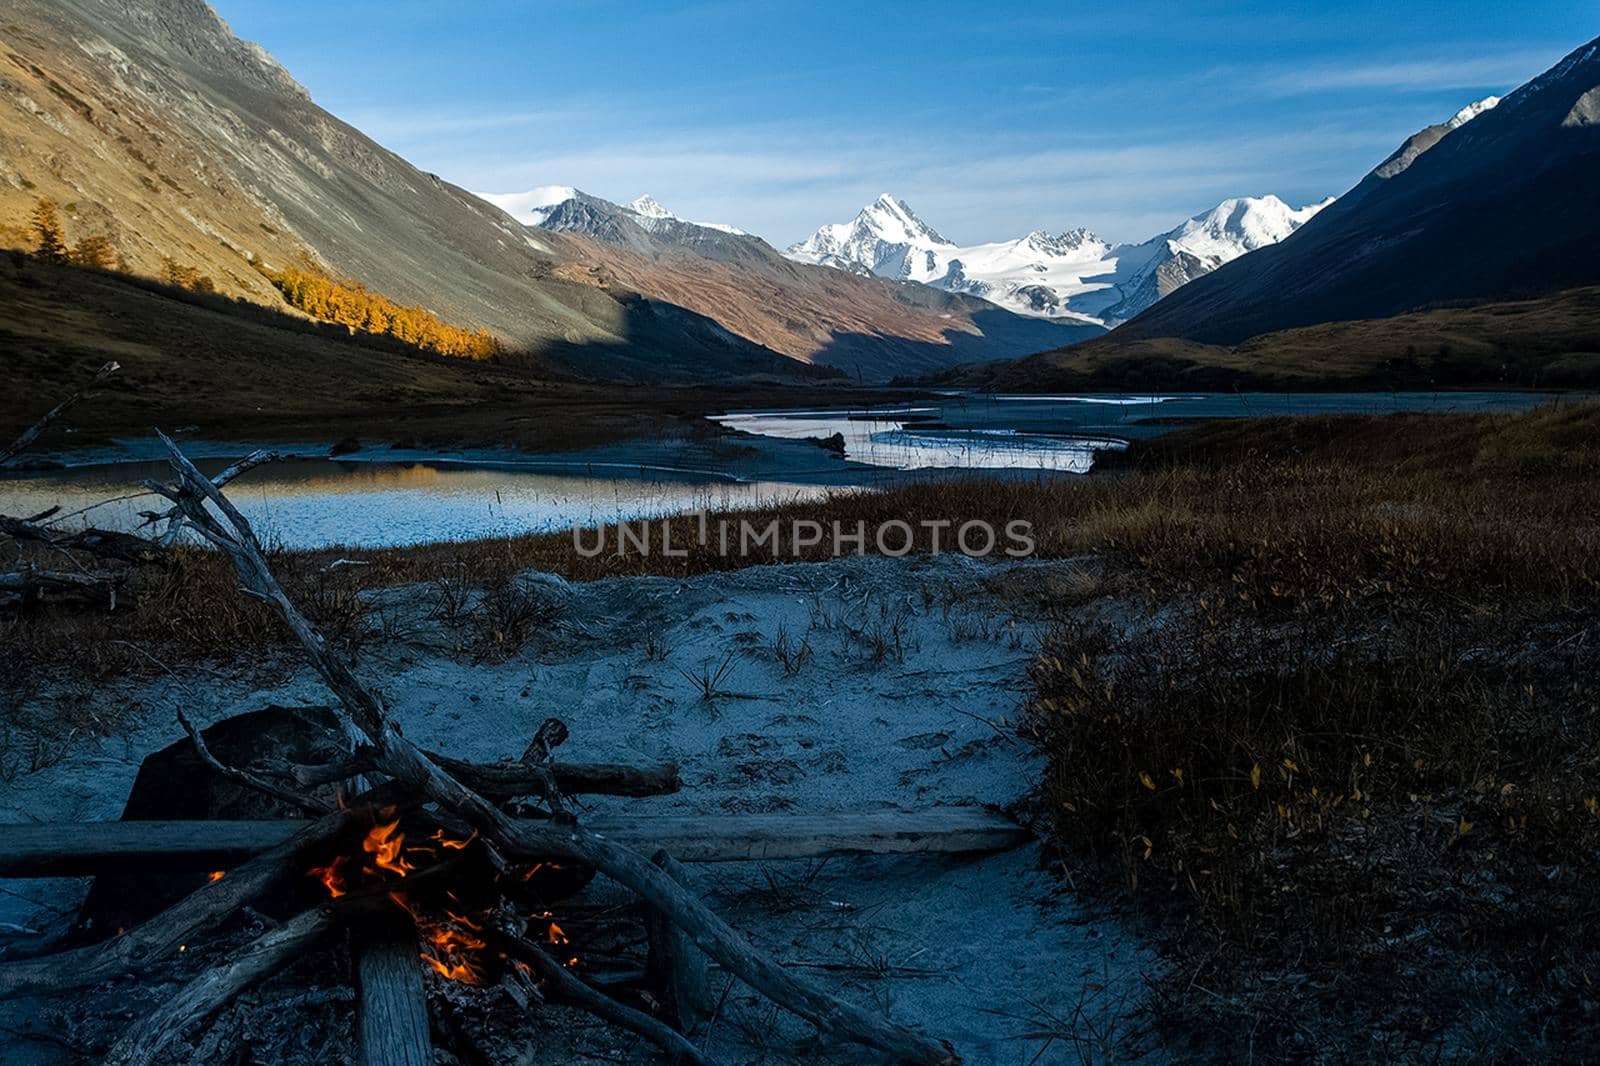 A bonfire on the banks of the Altai Mountain River.